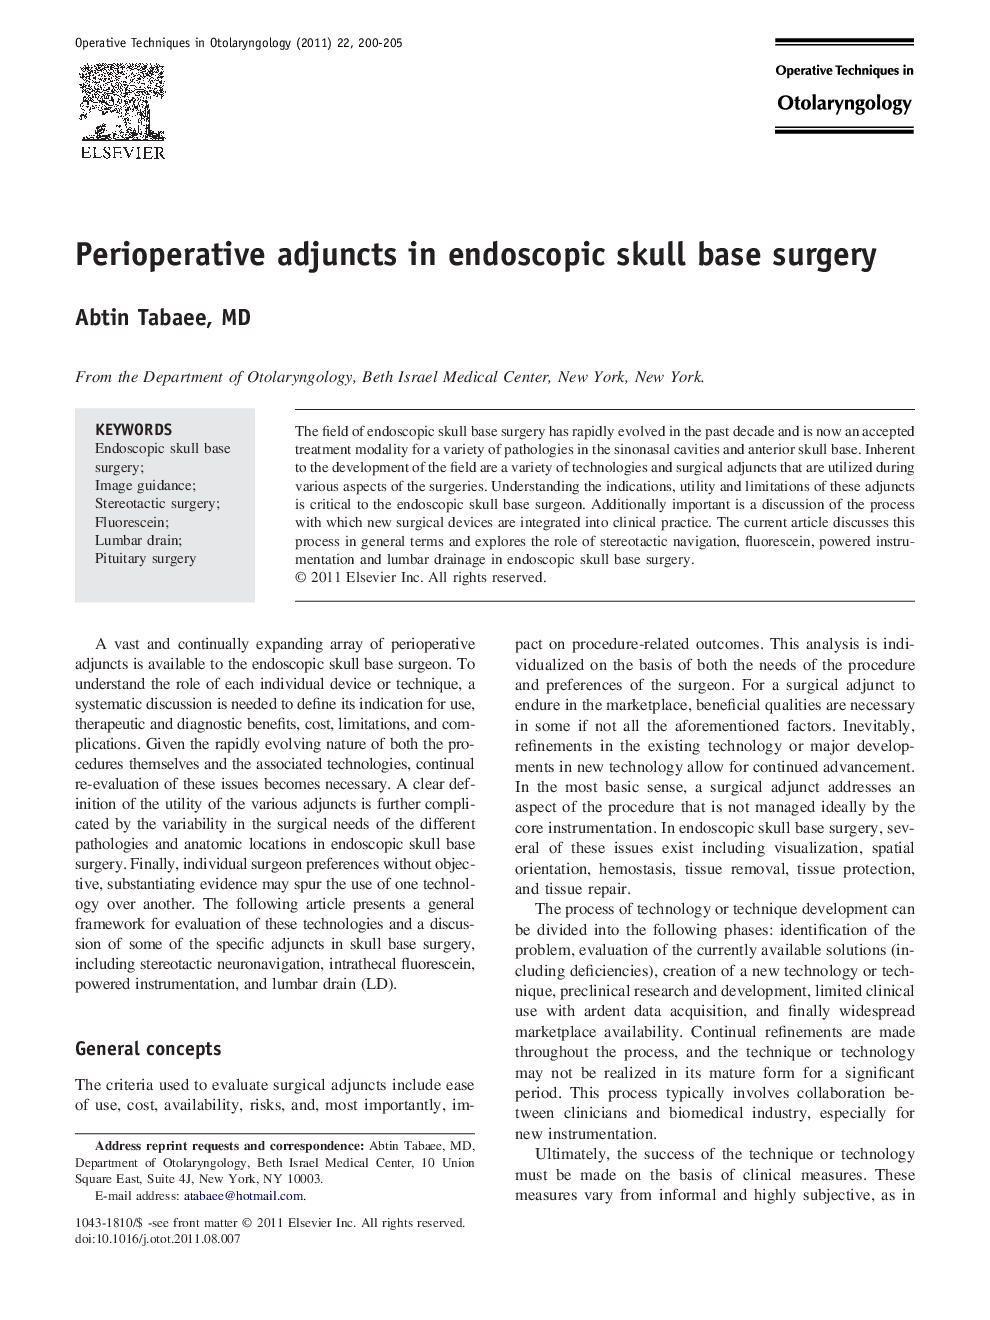 Perioperative adjuncts in endoscopic skull base surgery